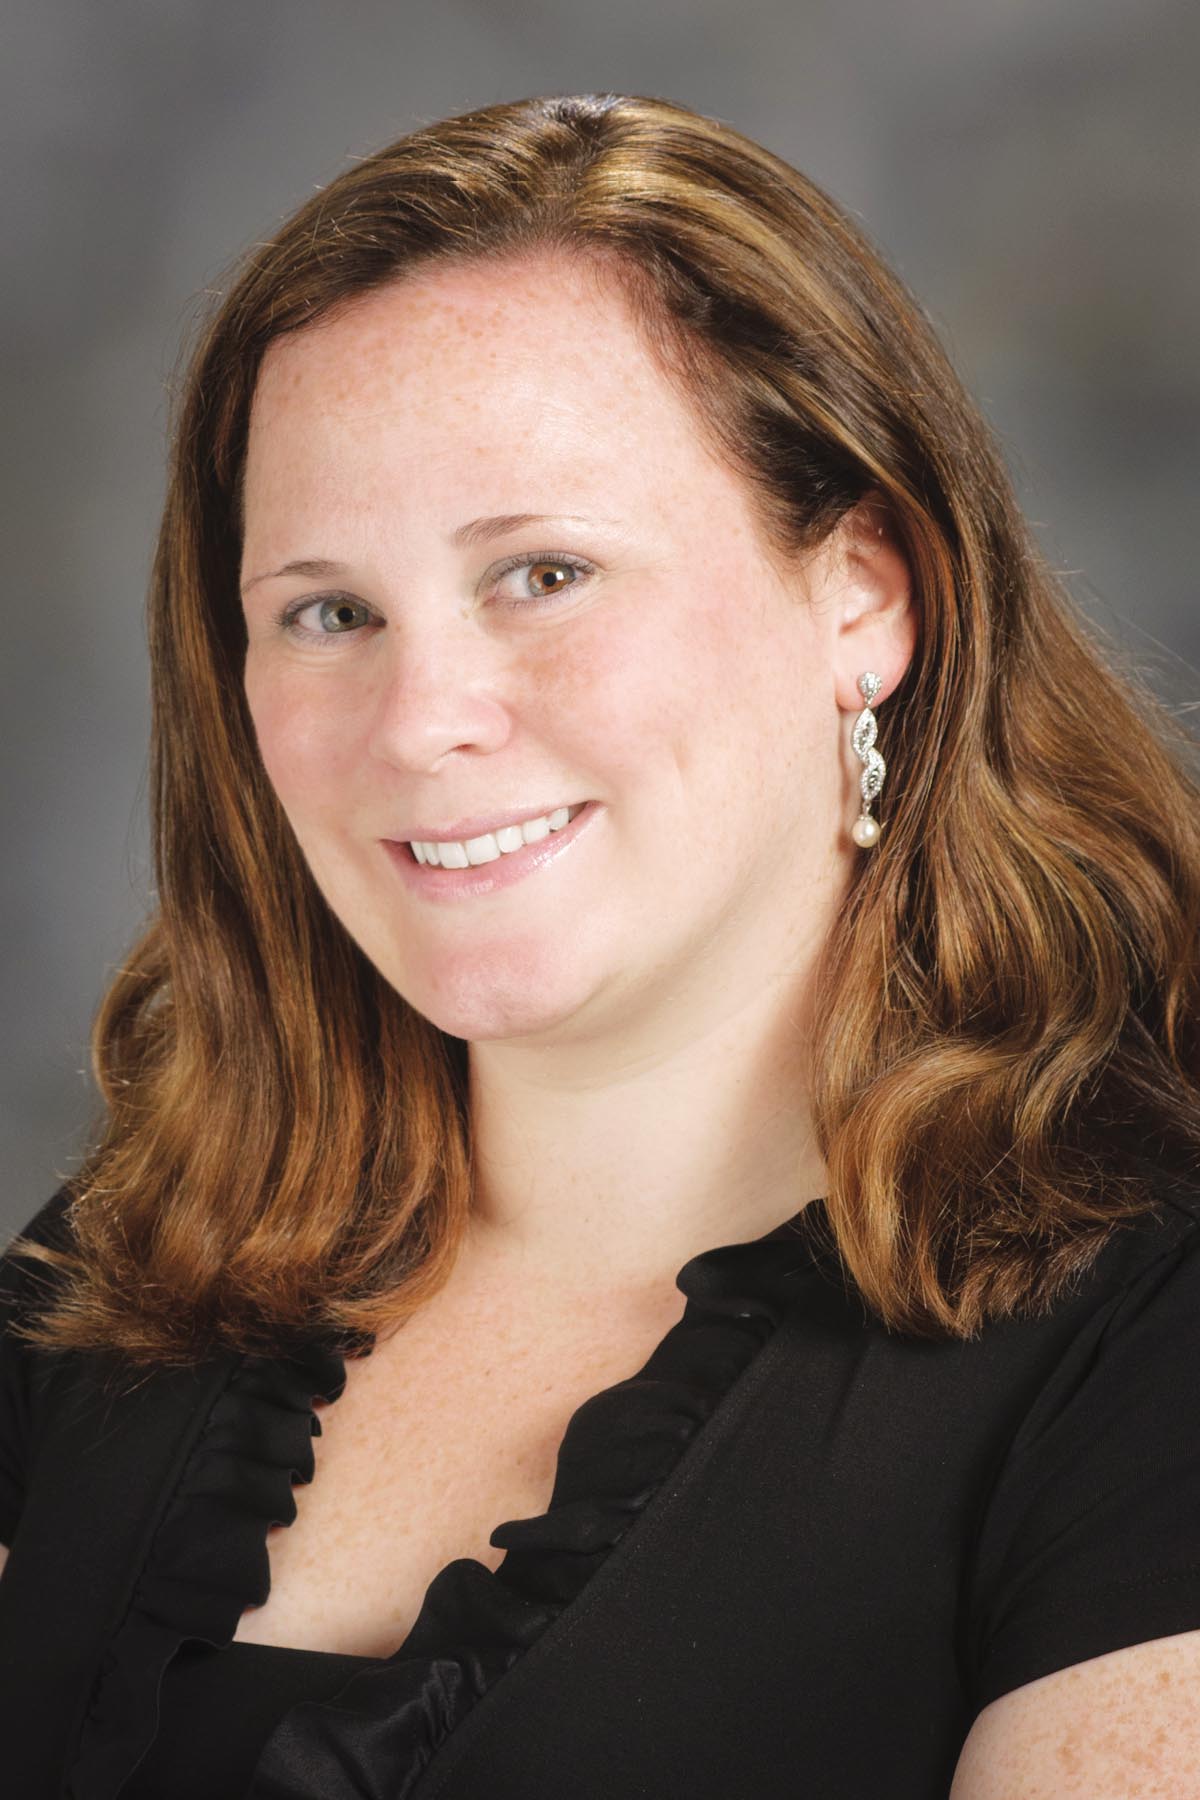 ONS member Kelly J. Brassil, PhD, RN, FAAN, is the lead care manager at the University of Texas MD Anderson Cancer Center in Houston and the director of research and real-world evidence at Pack Health in Birmingham, AL.